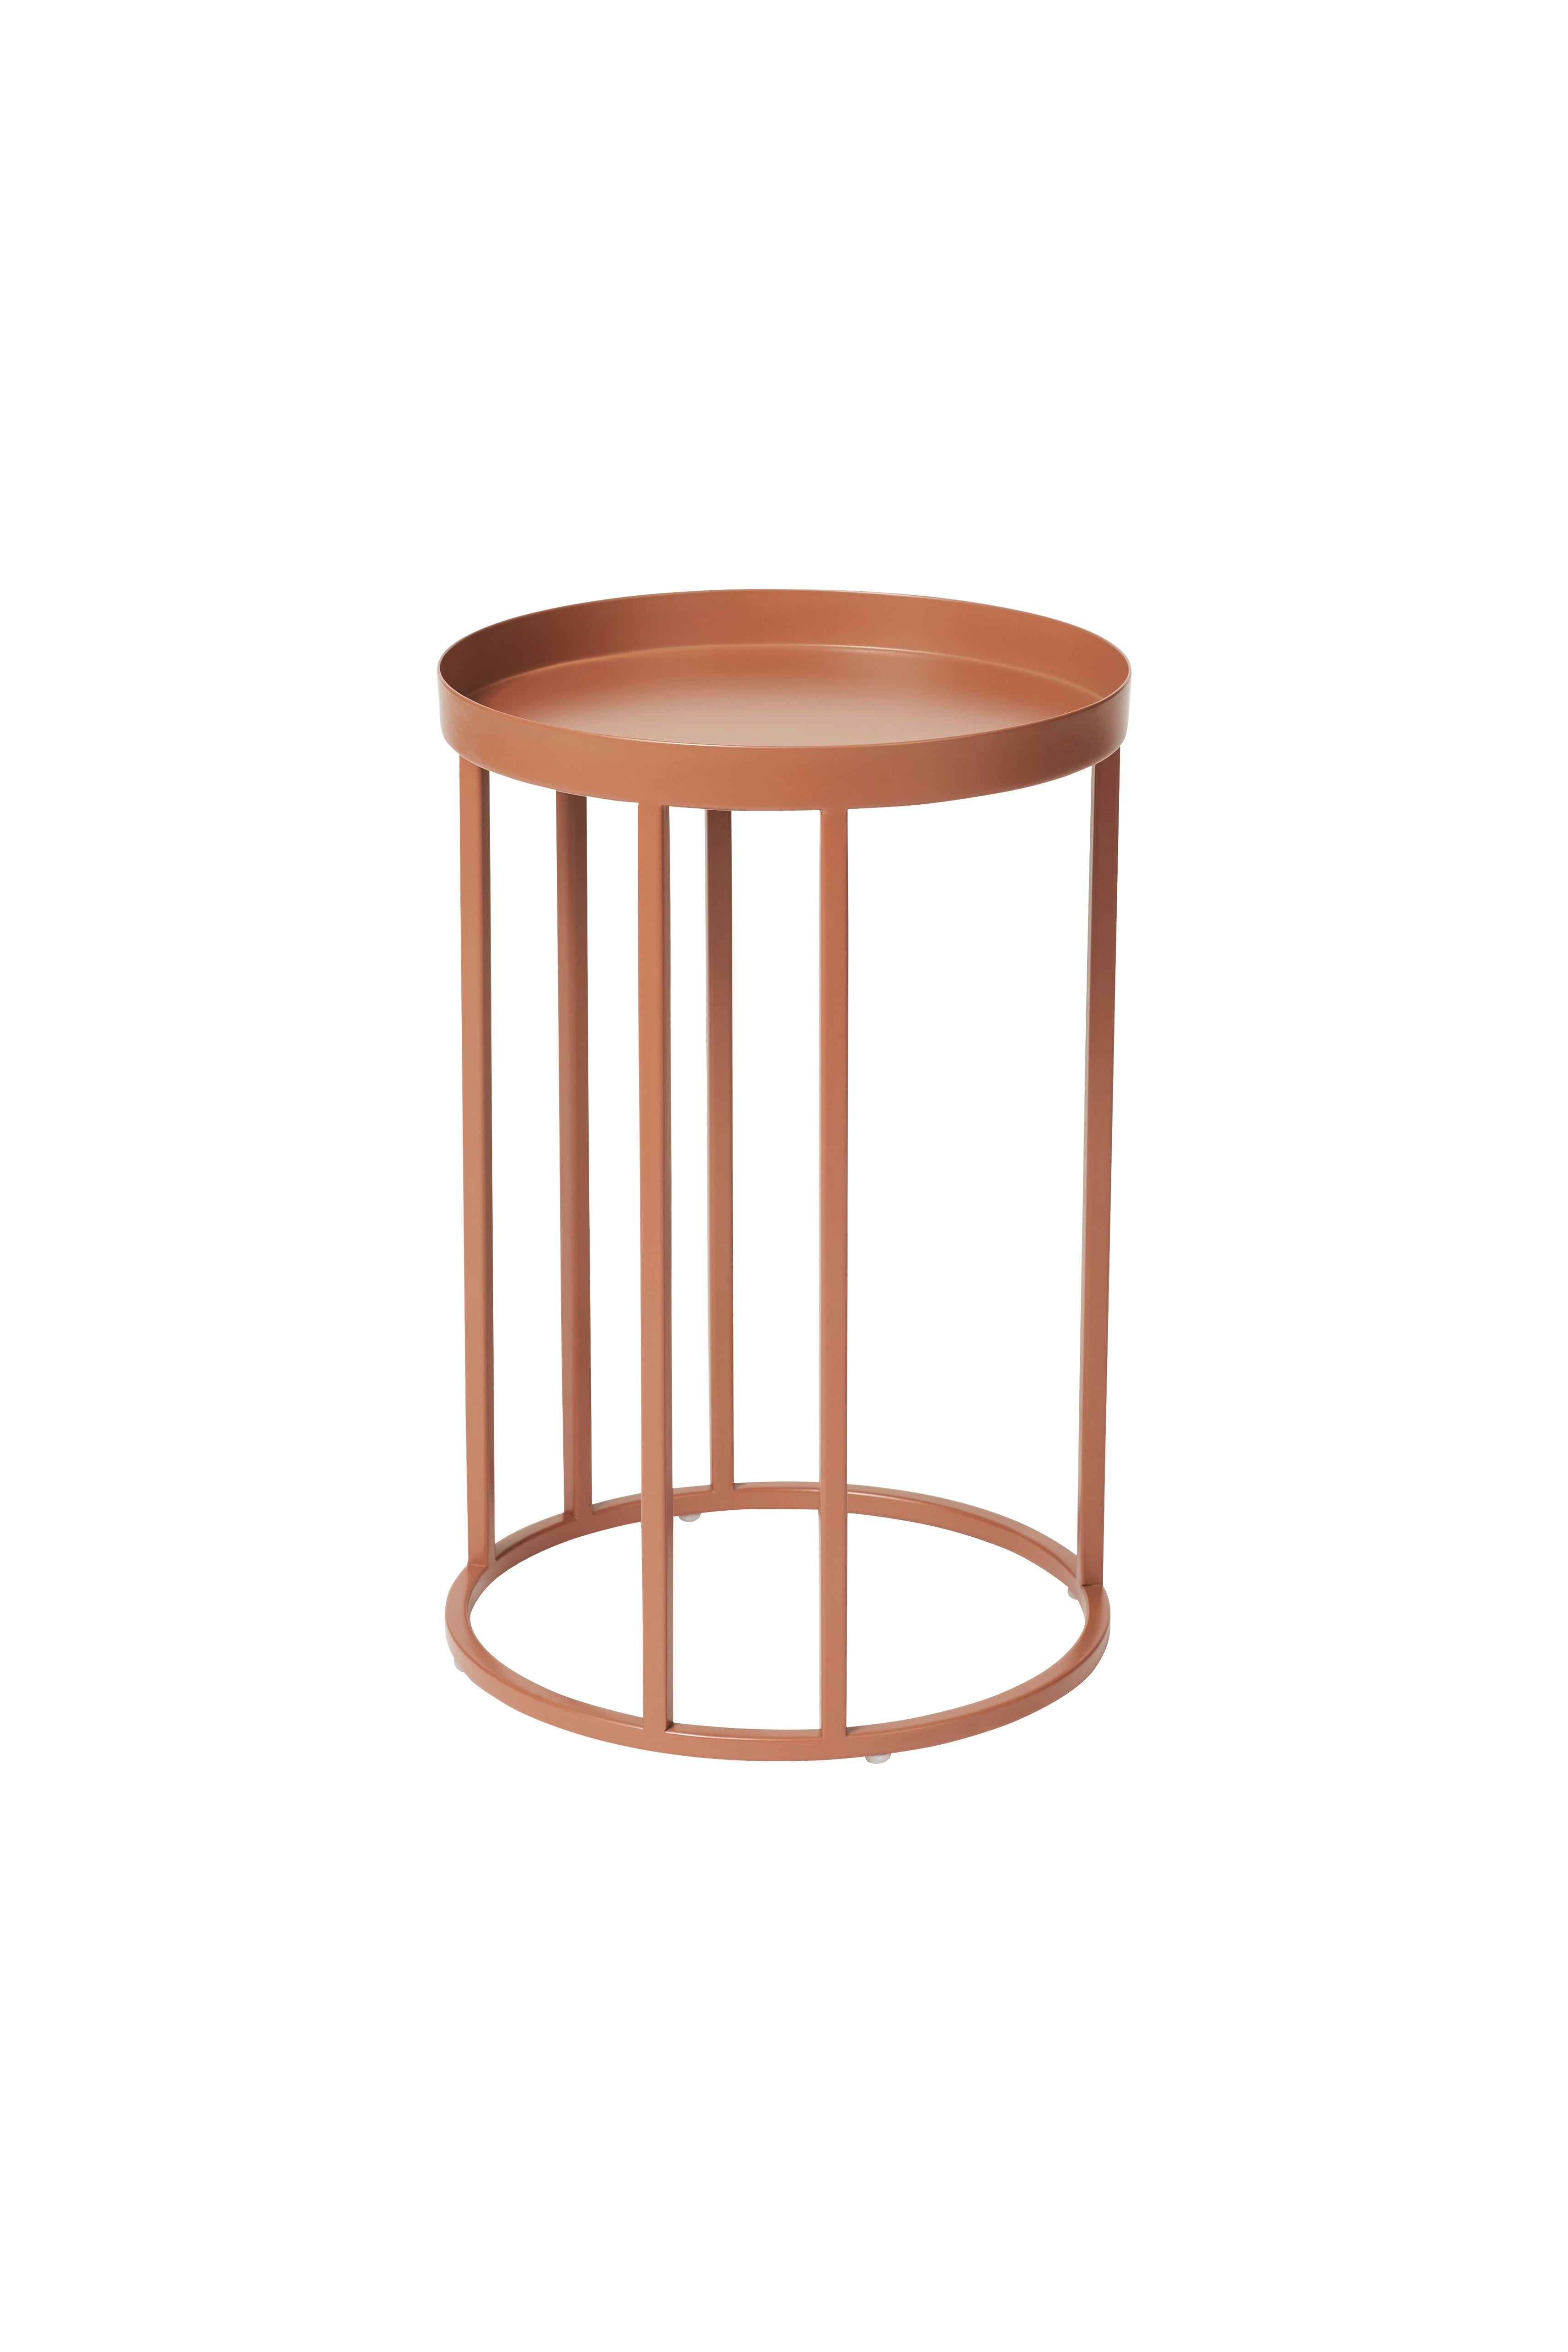 For Sale: Brown (Rusty Rose) Daisy Stool, by Sabine Stougaard from Warm Nordic 2